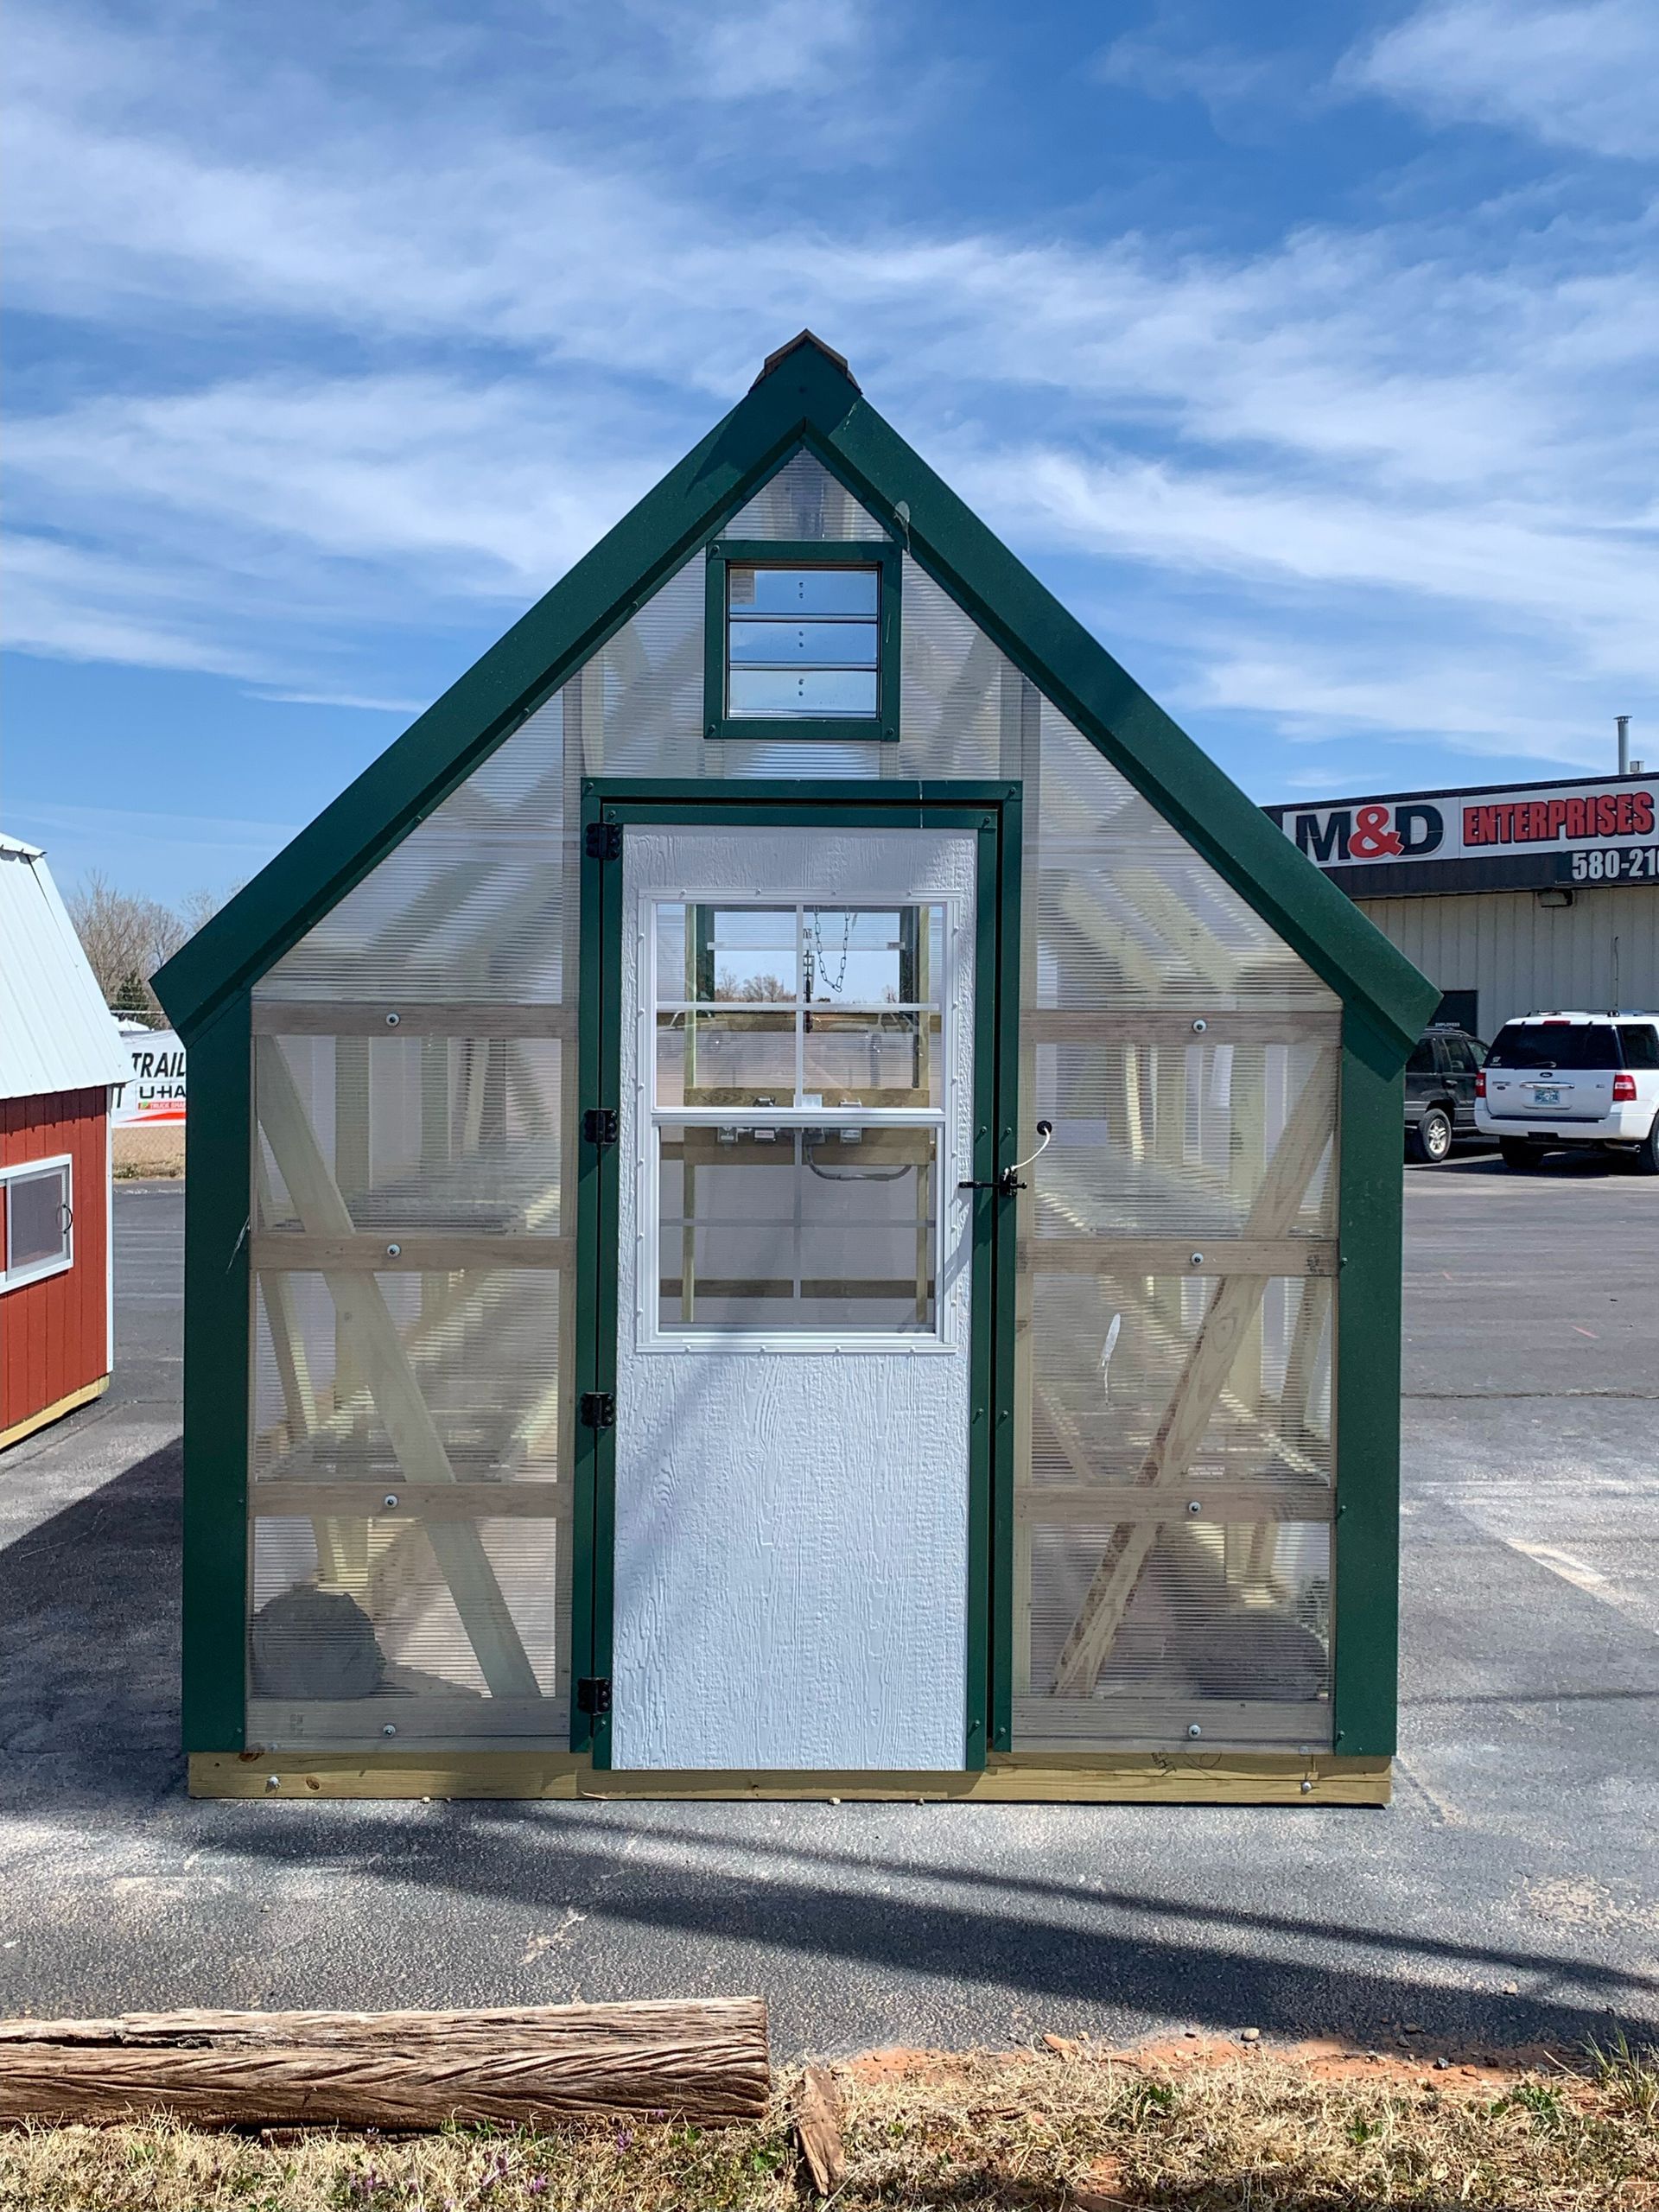 a 8 x 12 greenhouse in front of a m & d hardware store